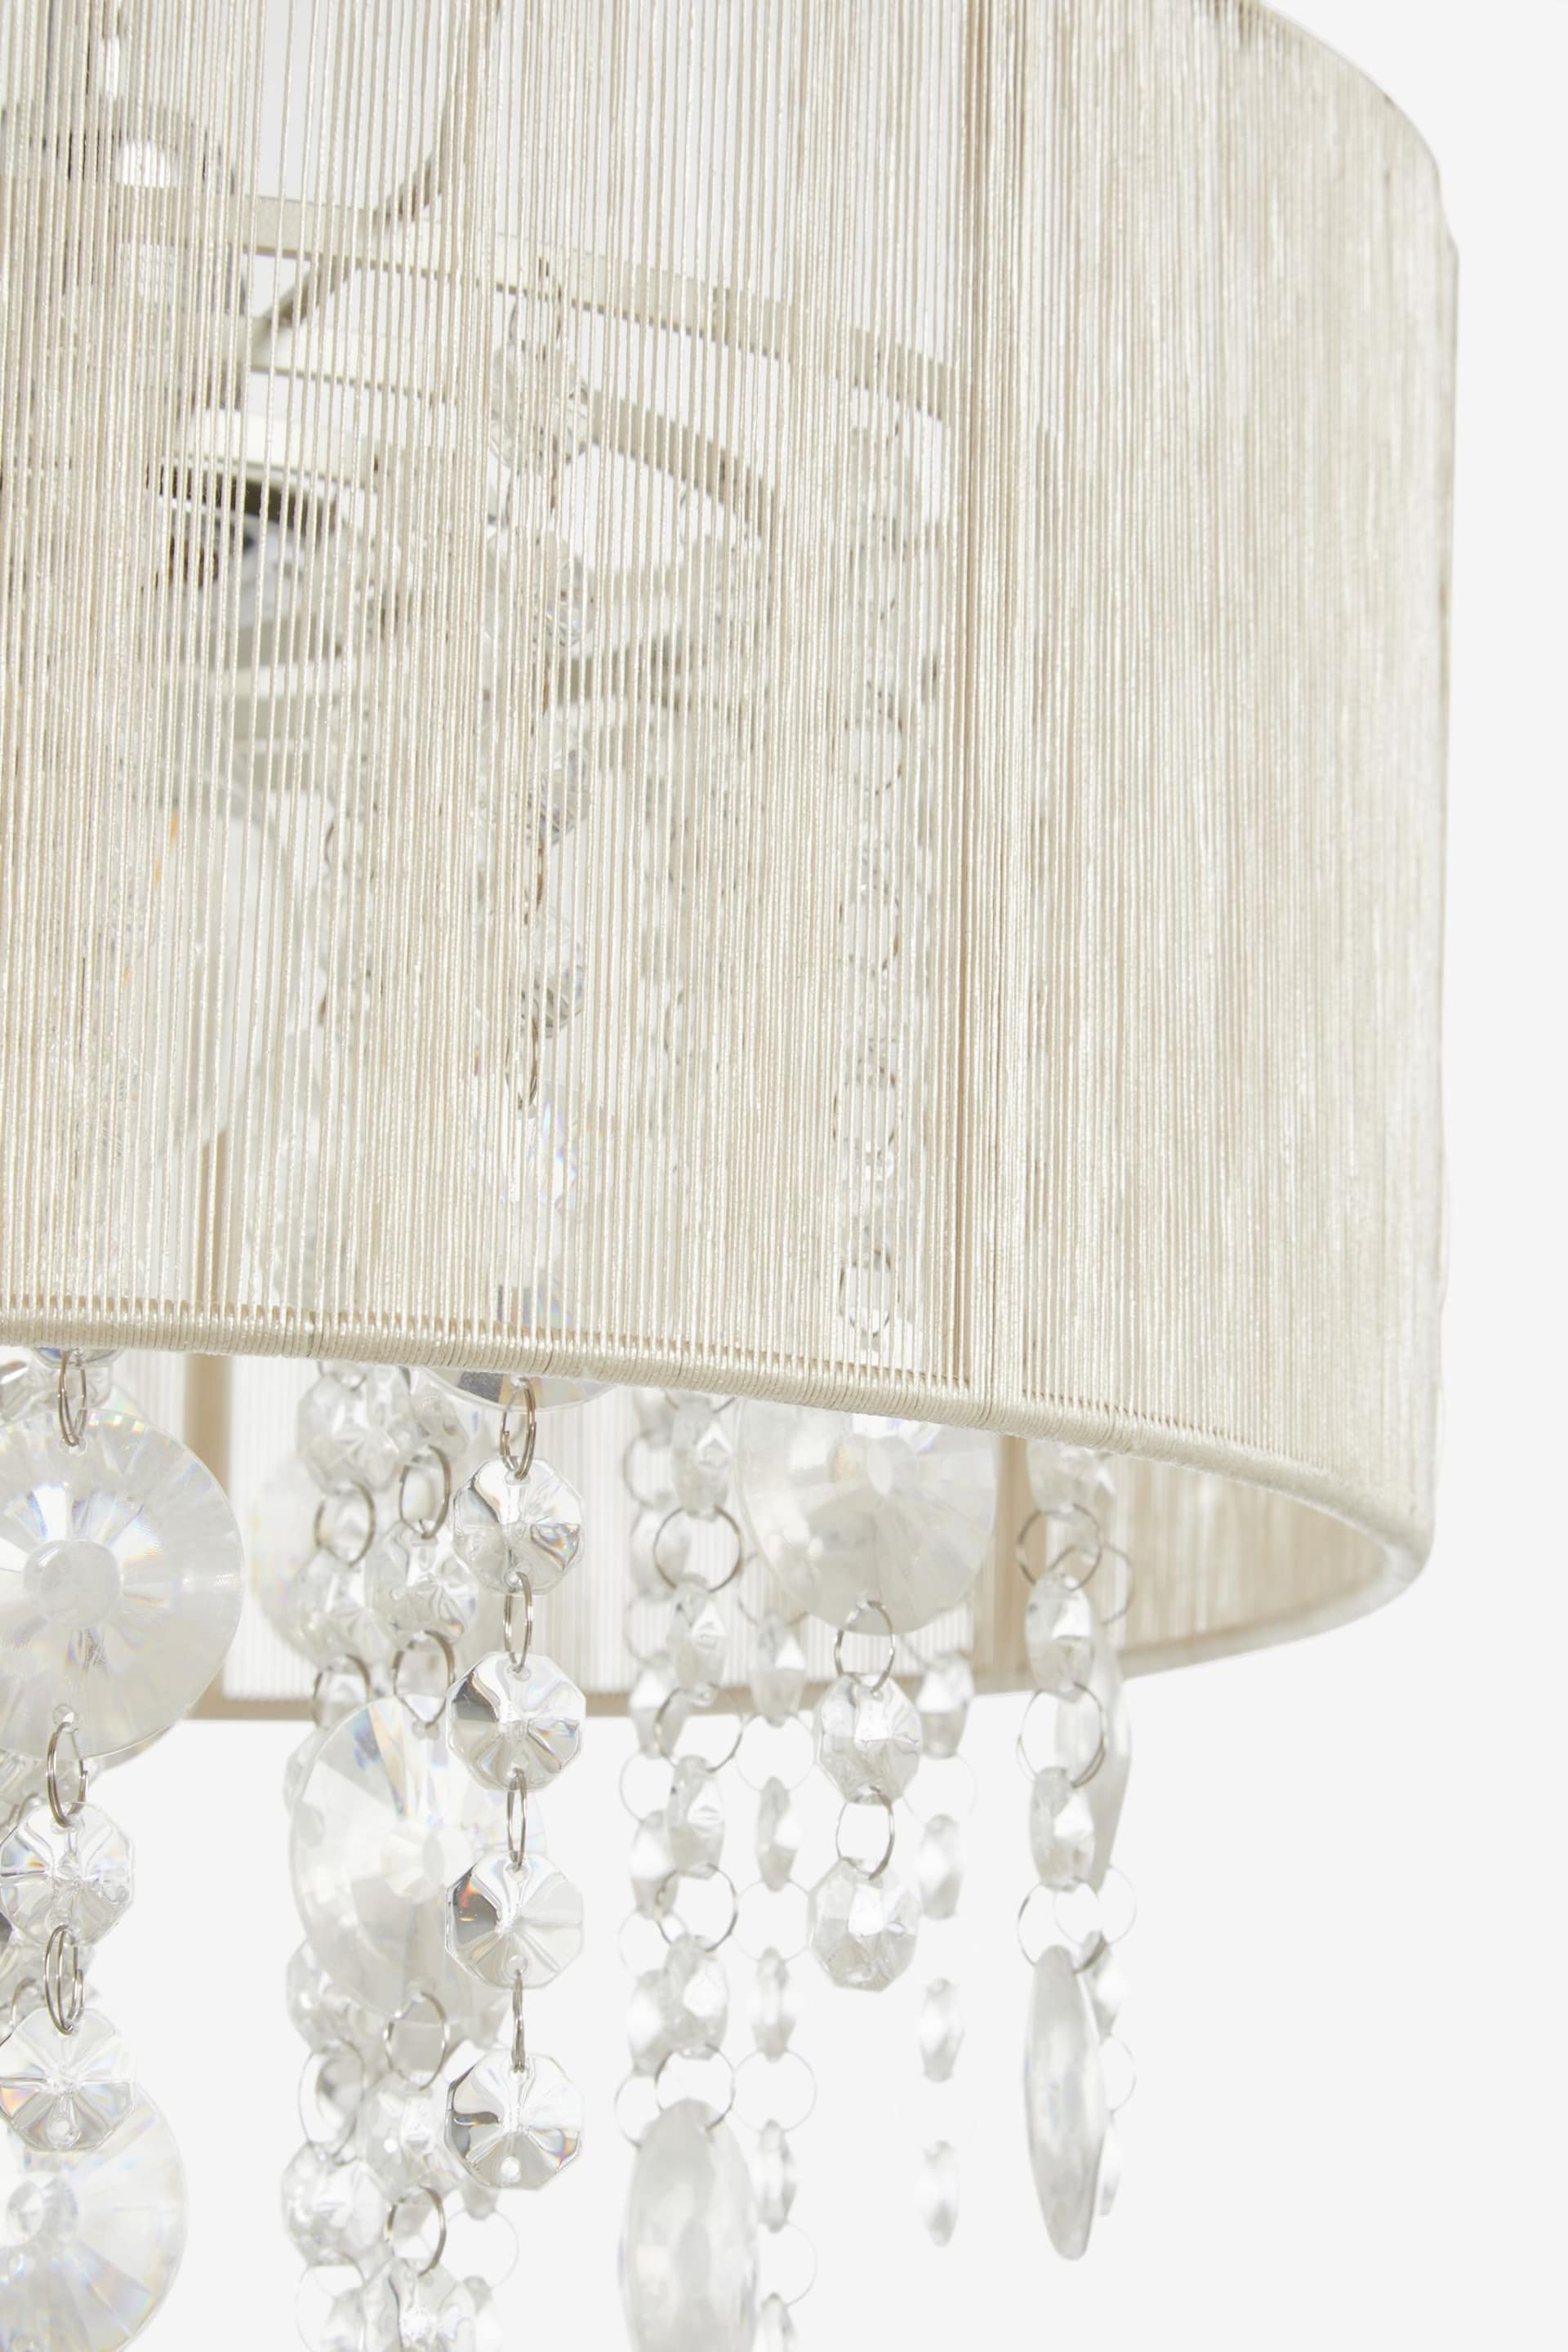 Champagne Gold Palazzo Easy Fit Pendant Lamp Shade - Image 5 of 8